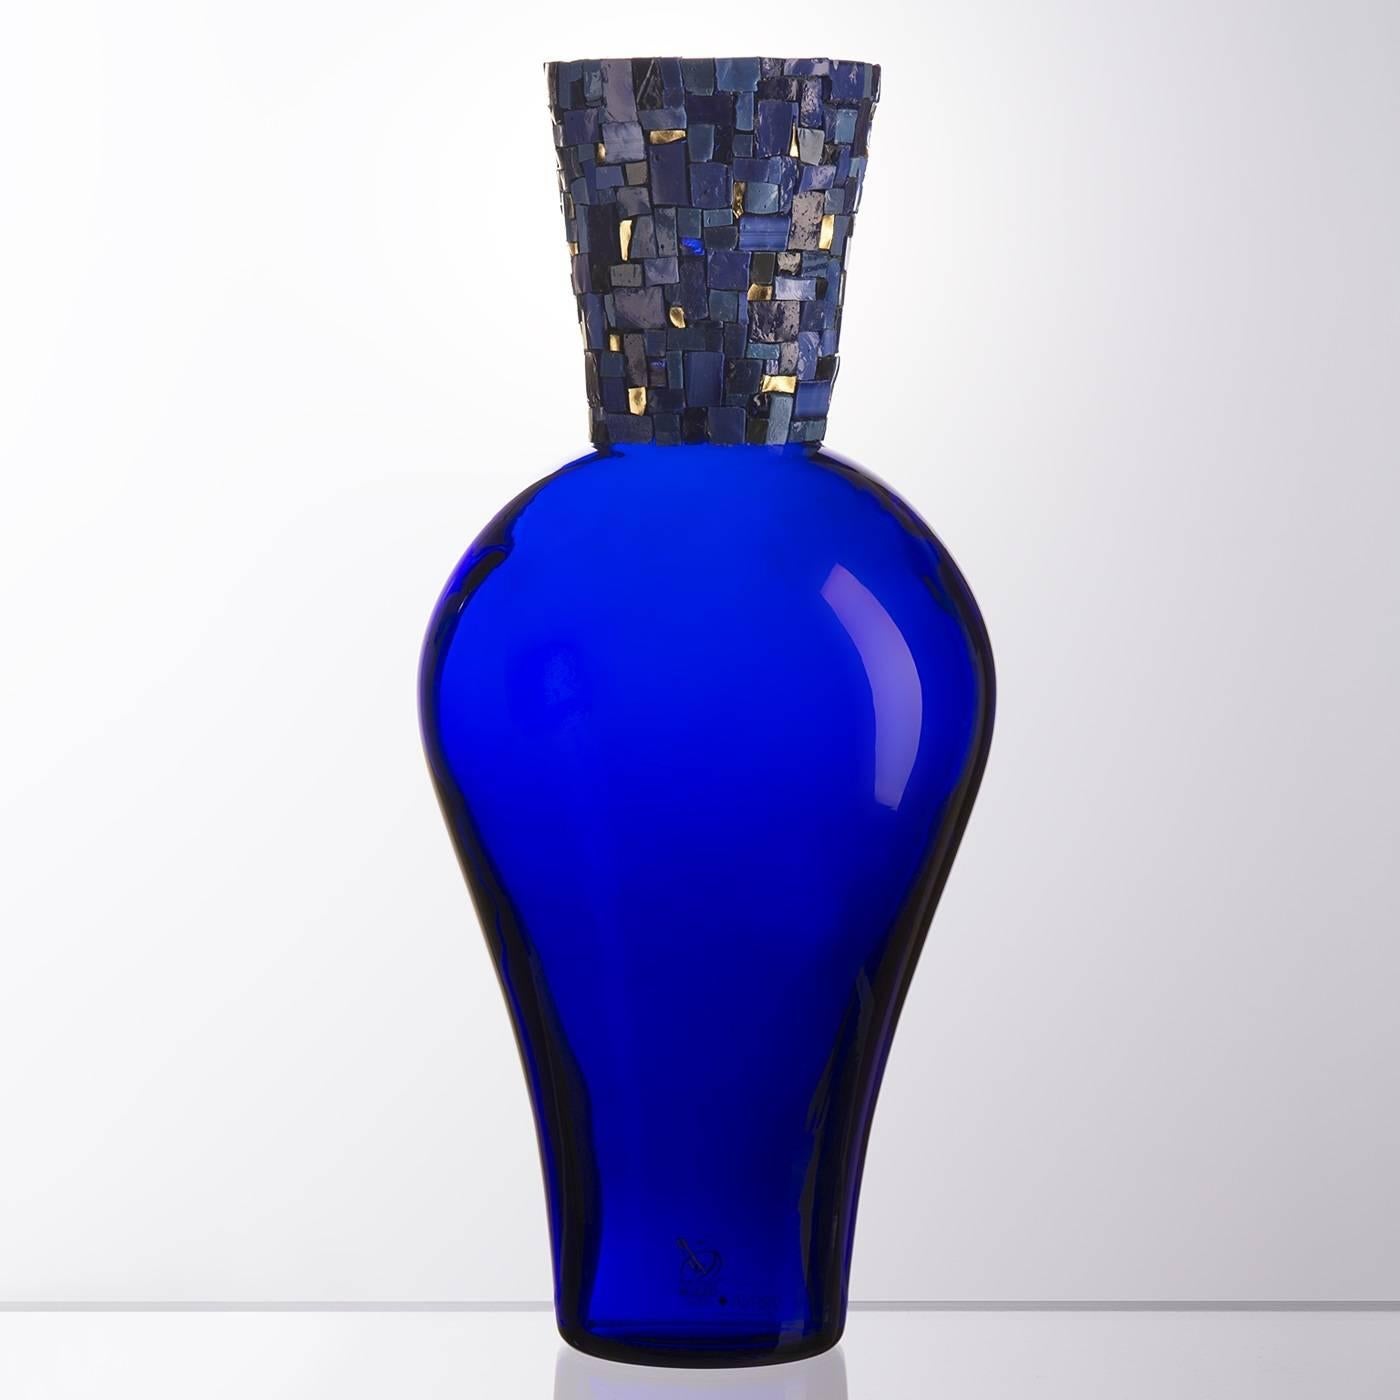 This exquisite Murano mouth-blown glass vase, handcrafted in Murano using centuries-old techniques, has a stunning Amphora-shape body with a richly accented neck featuring a mosaic made of gold foil tesserae and opaque and transparent blue glass